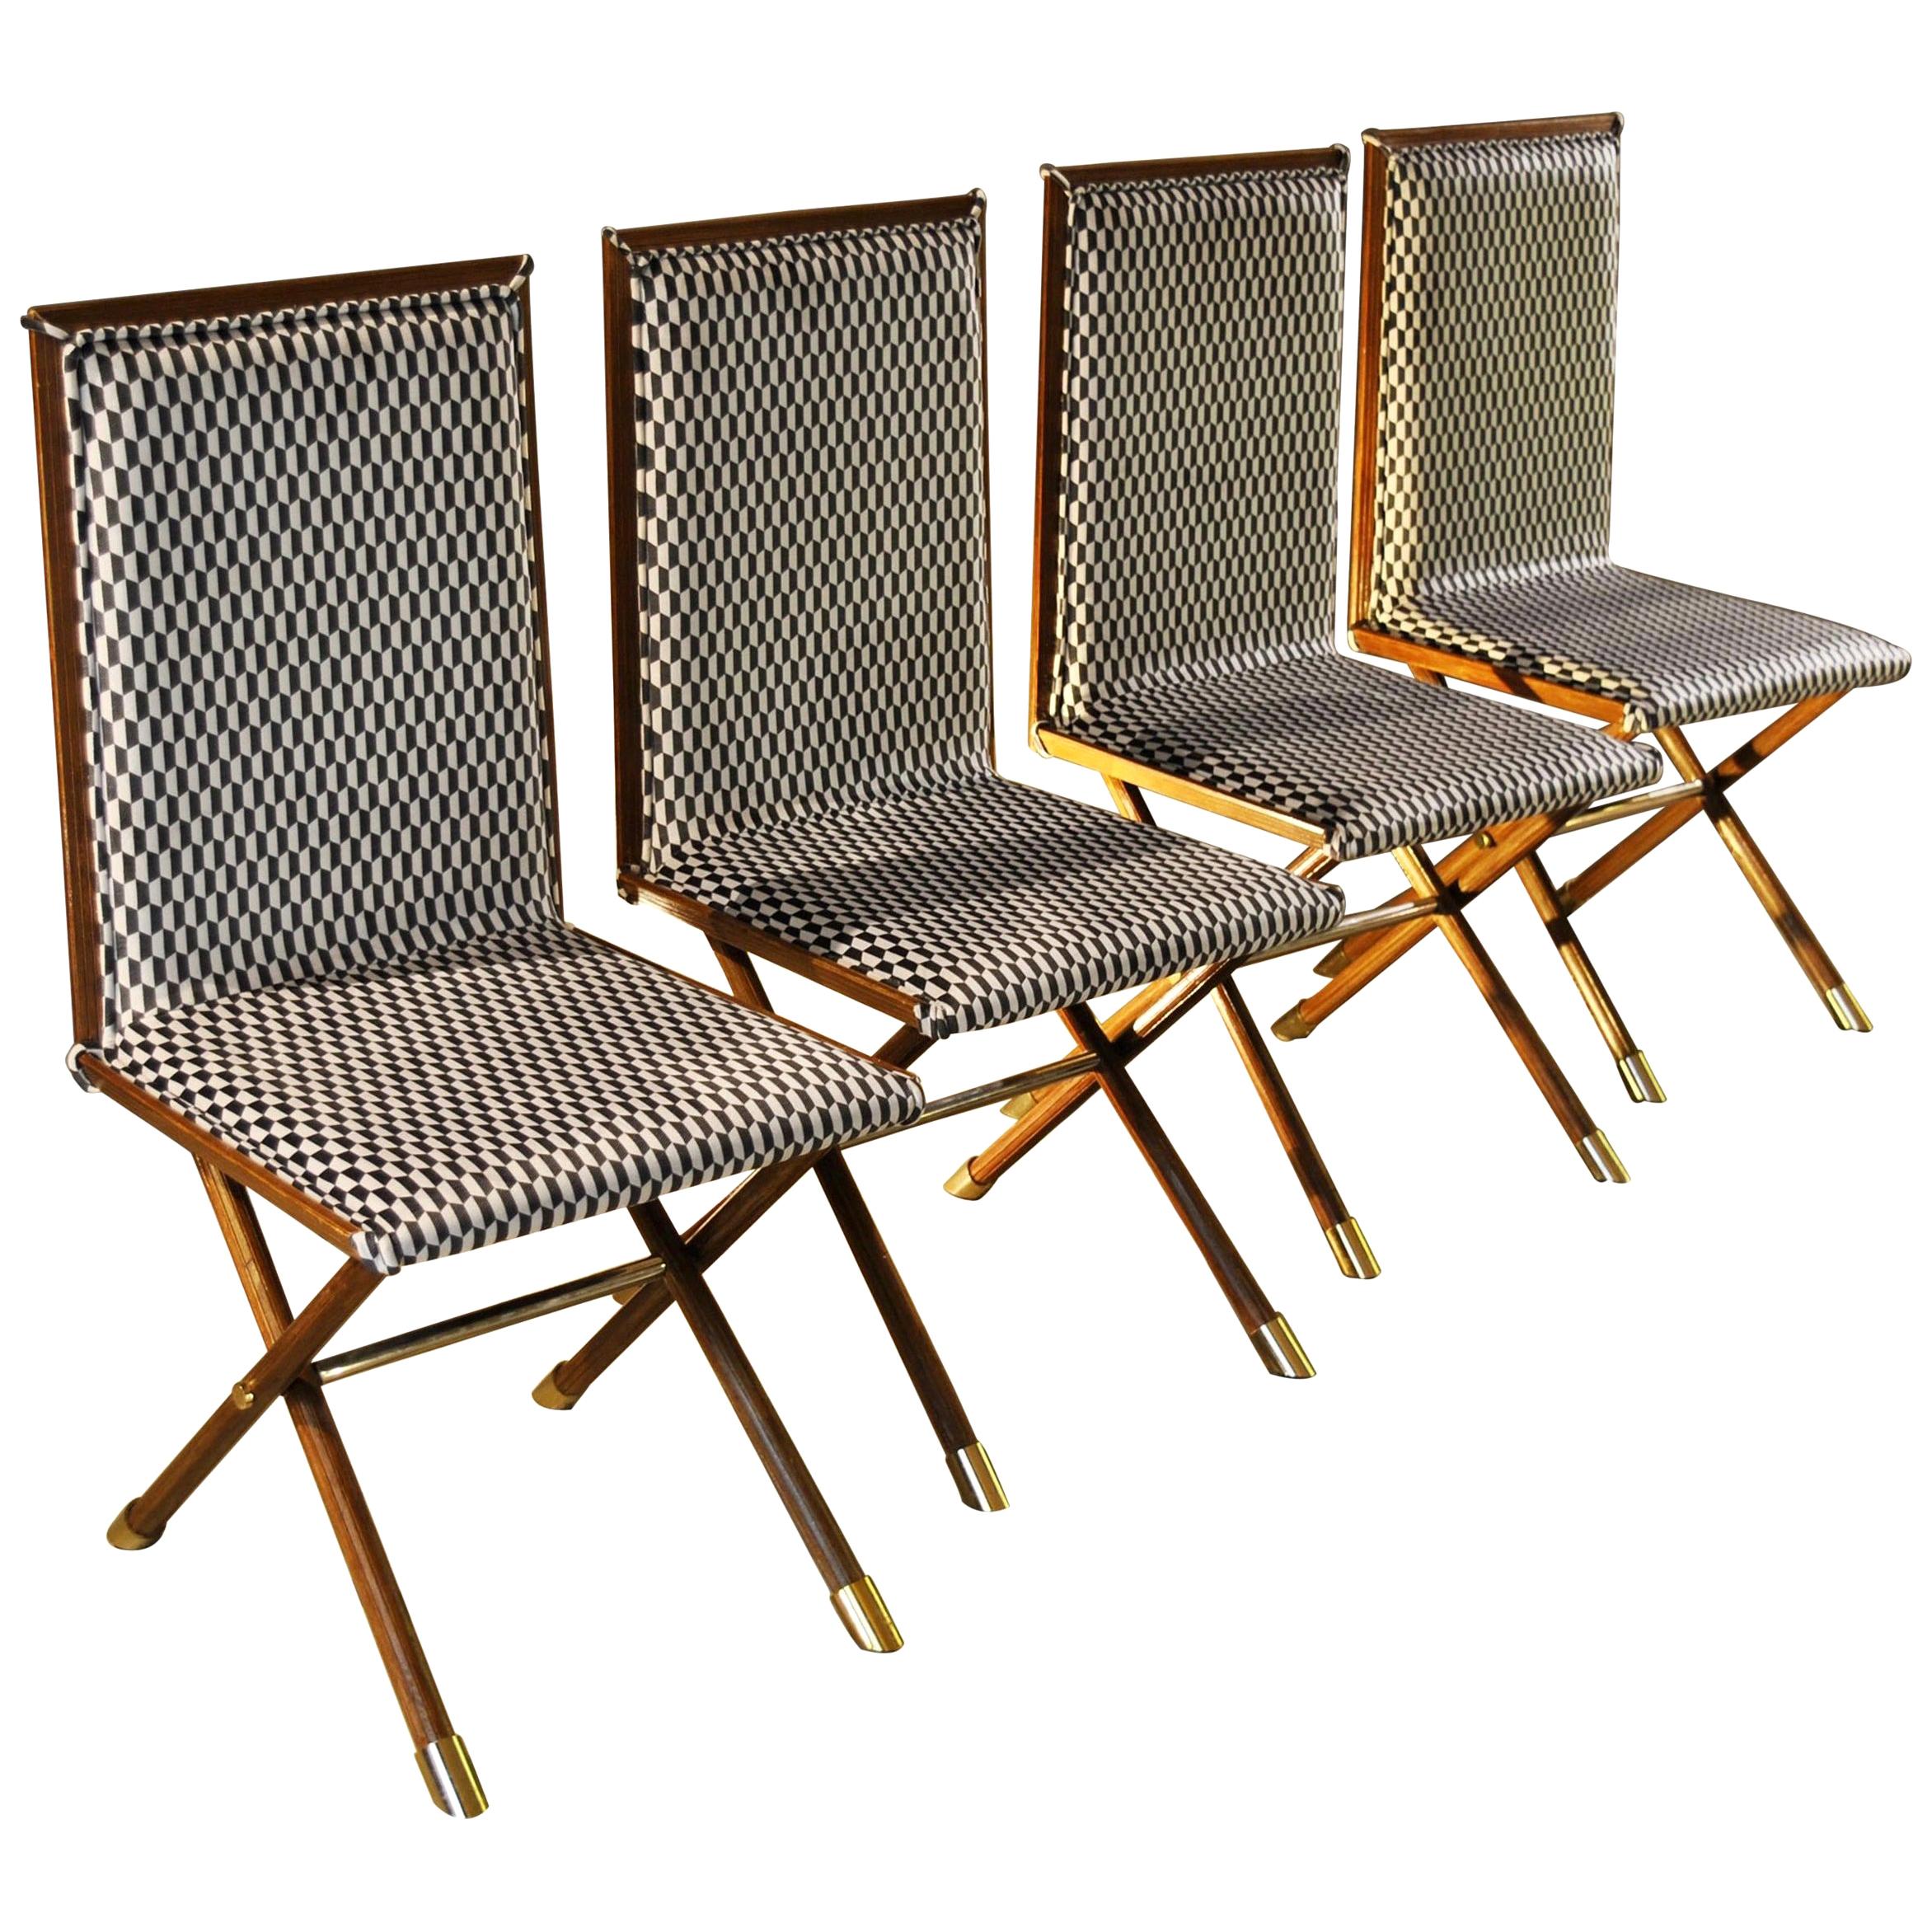 Romeo Rega in the Manner Midcentury Italian Chairs with Brass Fittings 